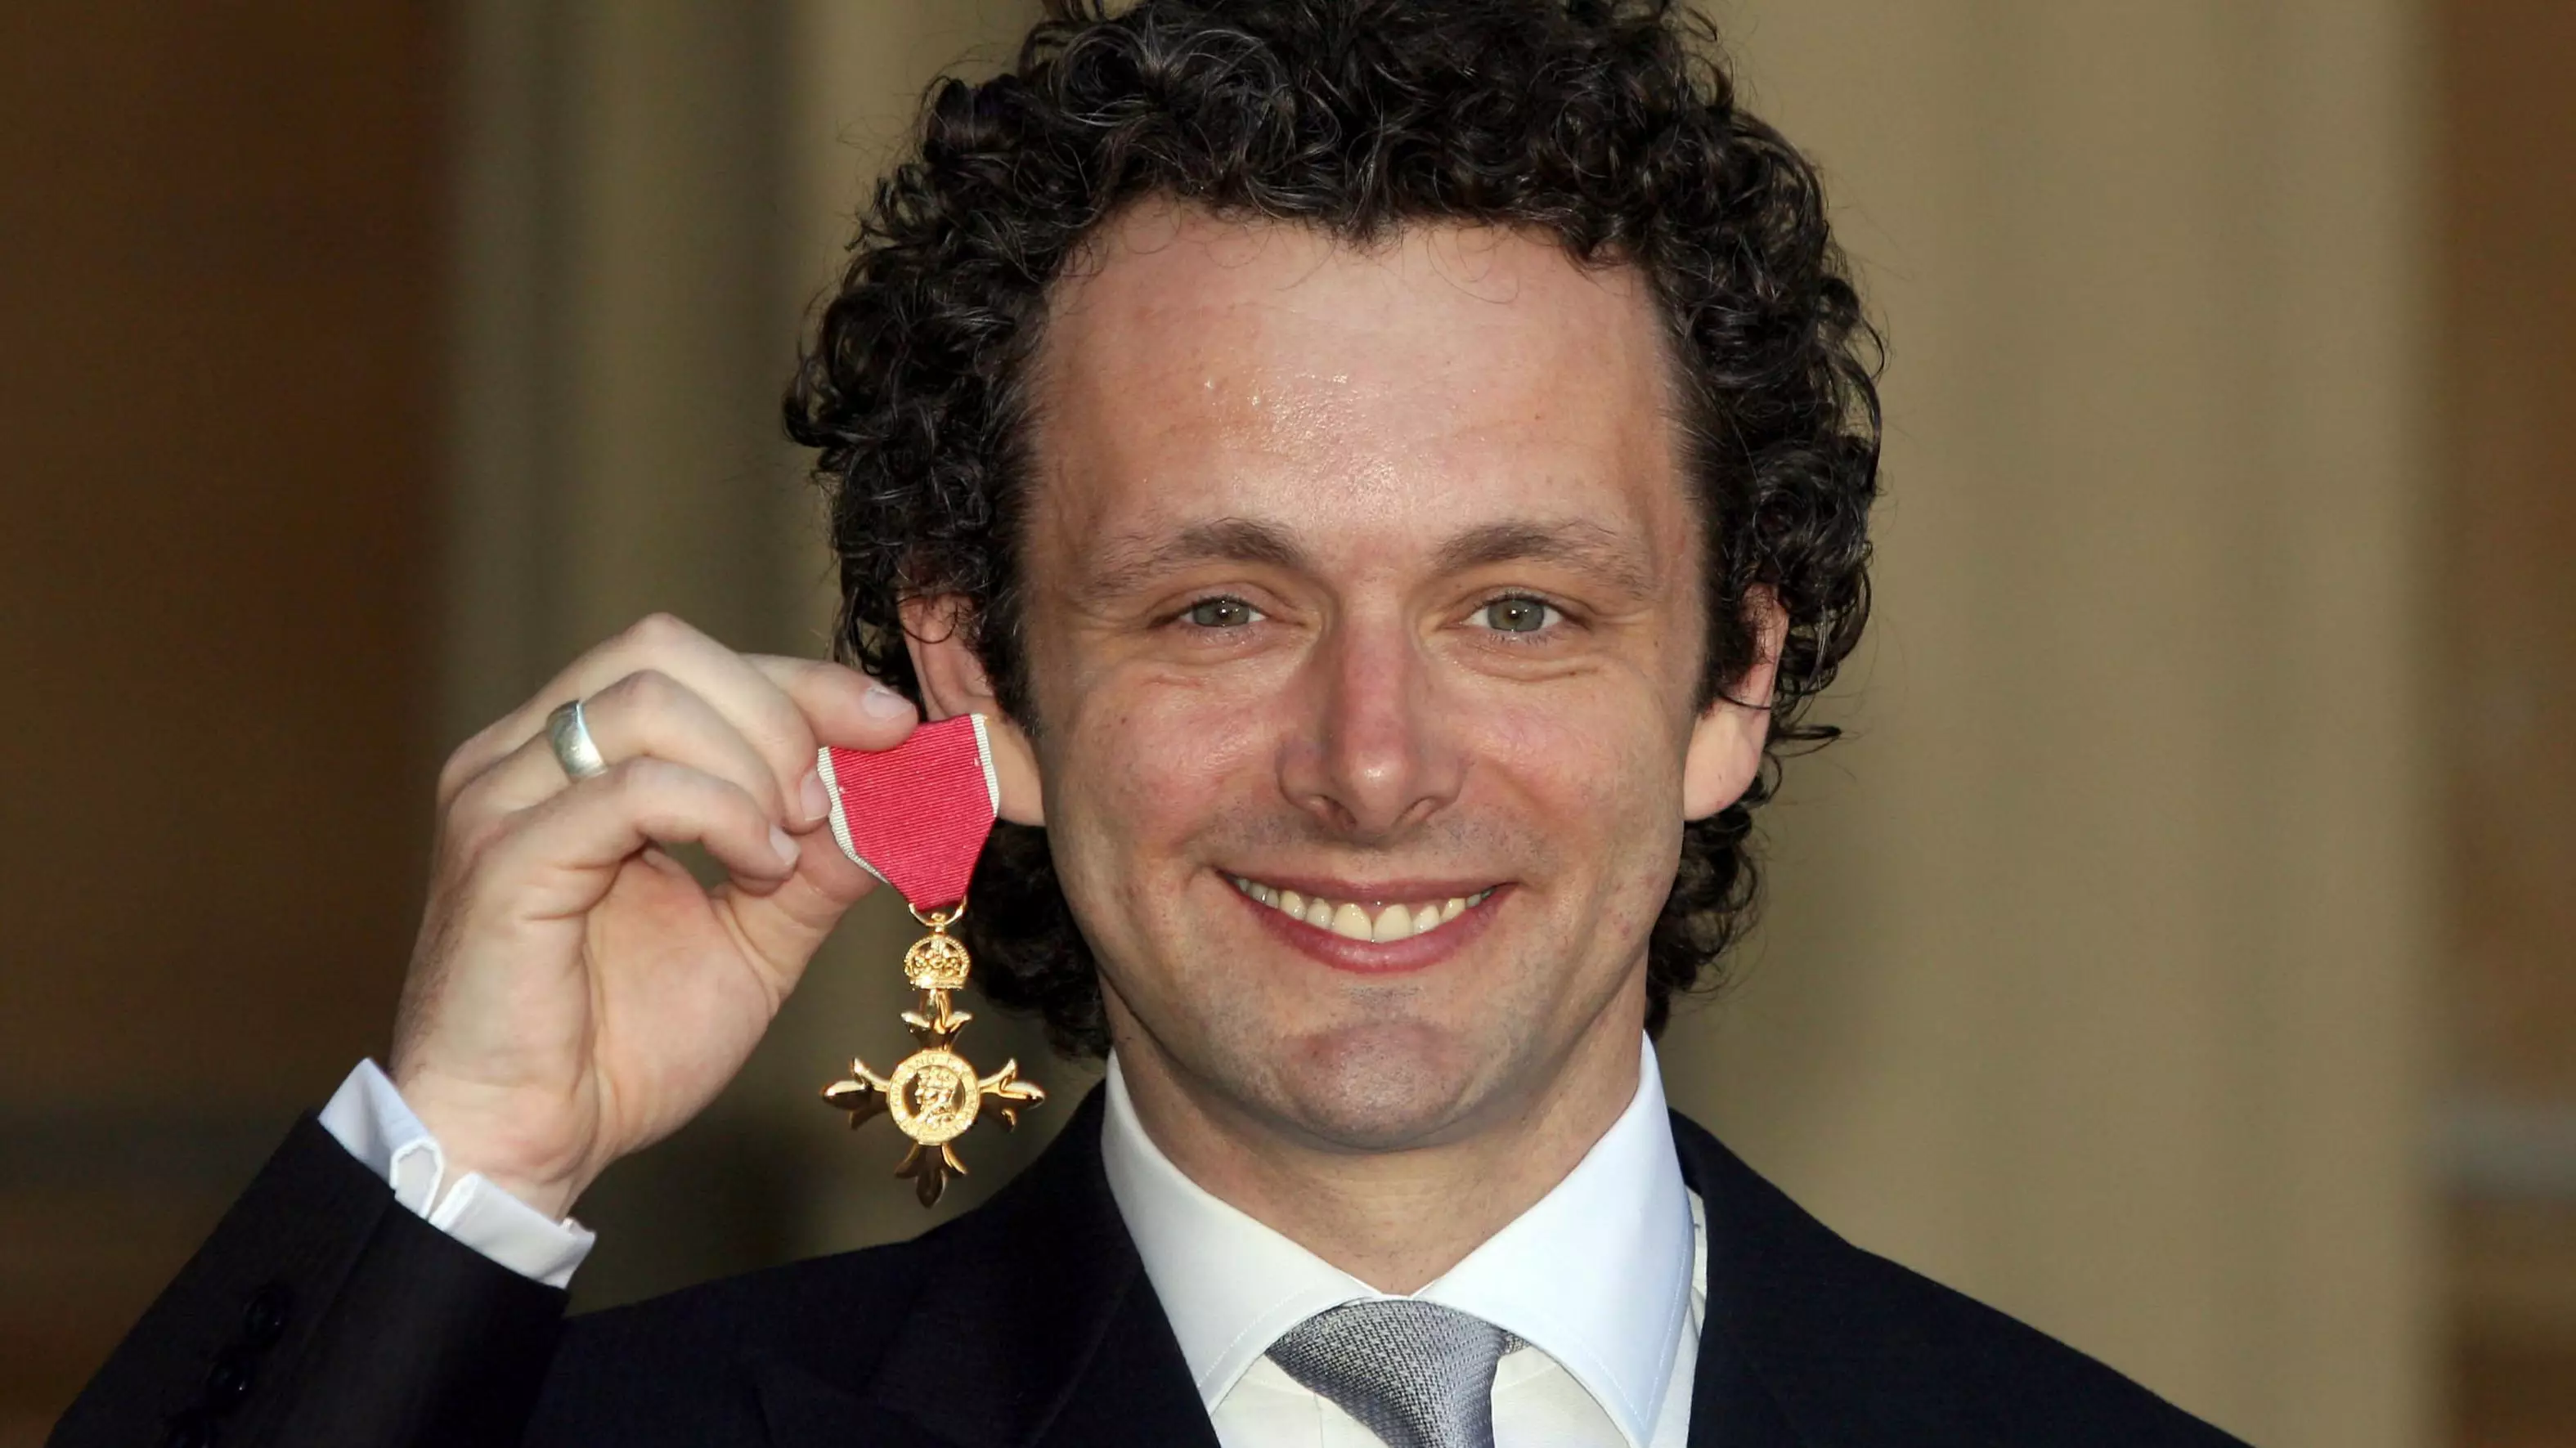 Michael Sheen Explains Why He Gave Back His OBE